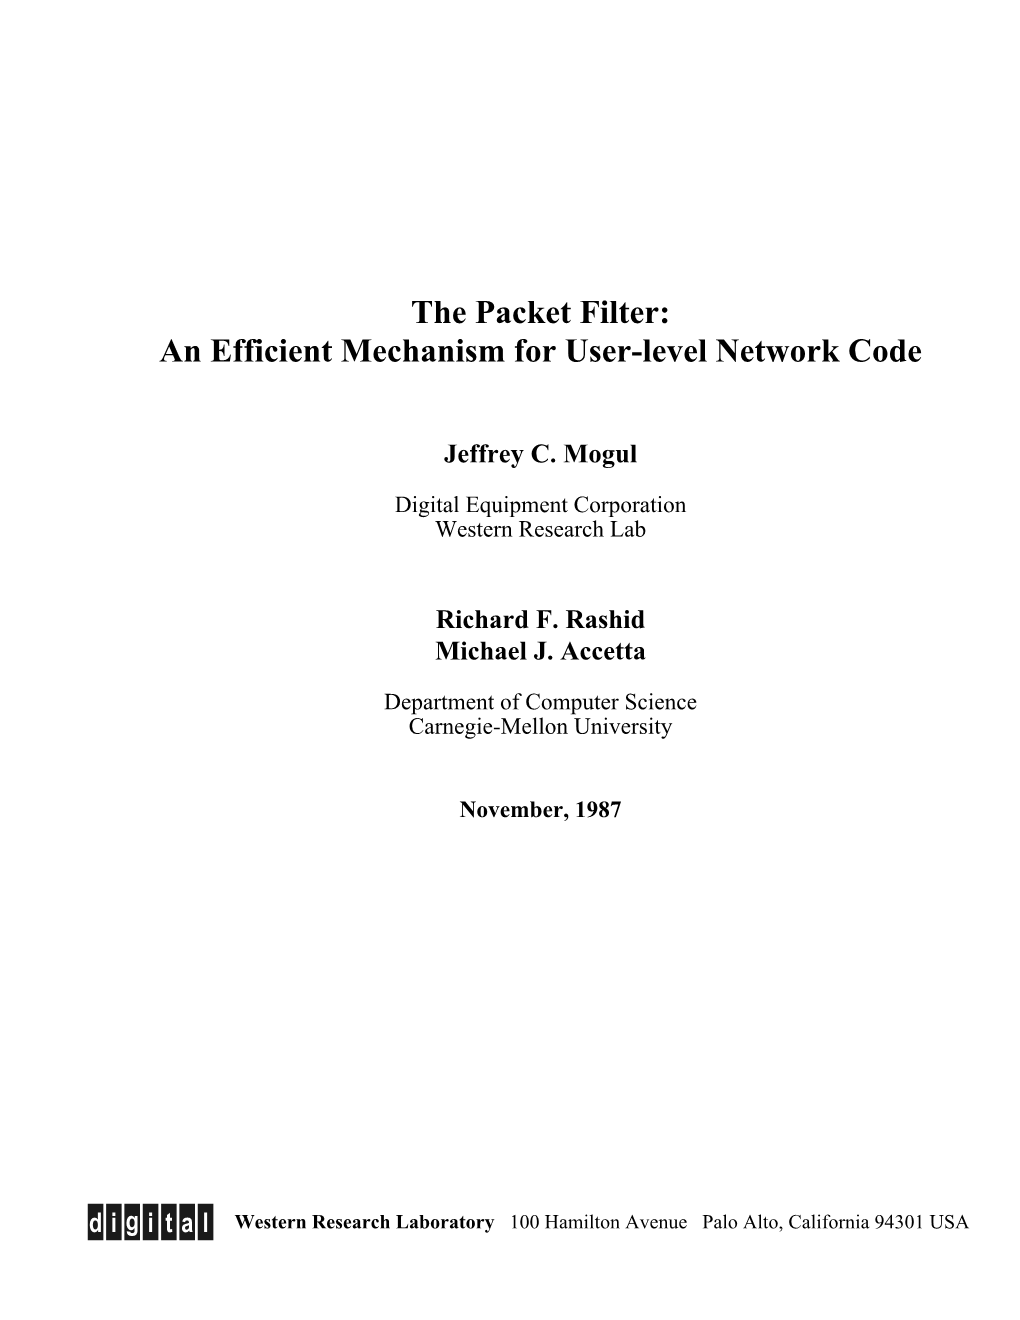 The Packet Filter: an Efficient Mechanism for User-Level Network Code